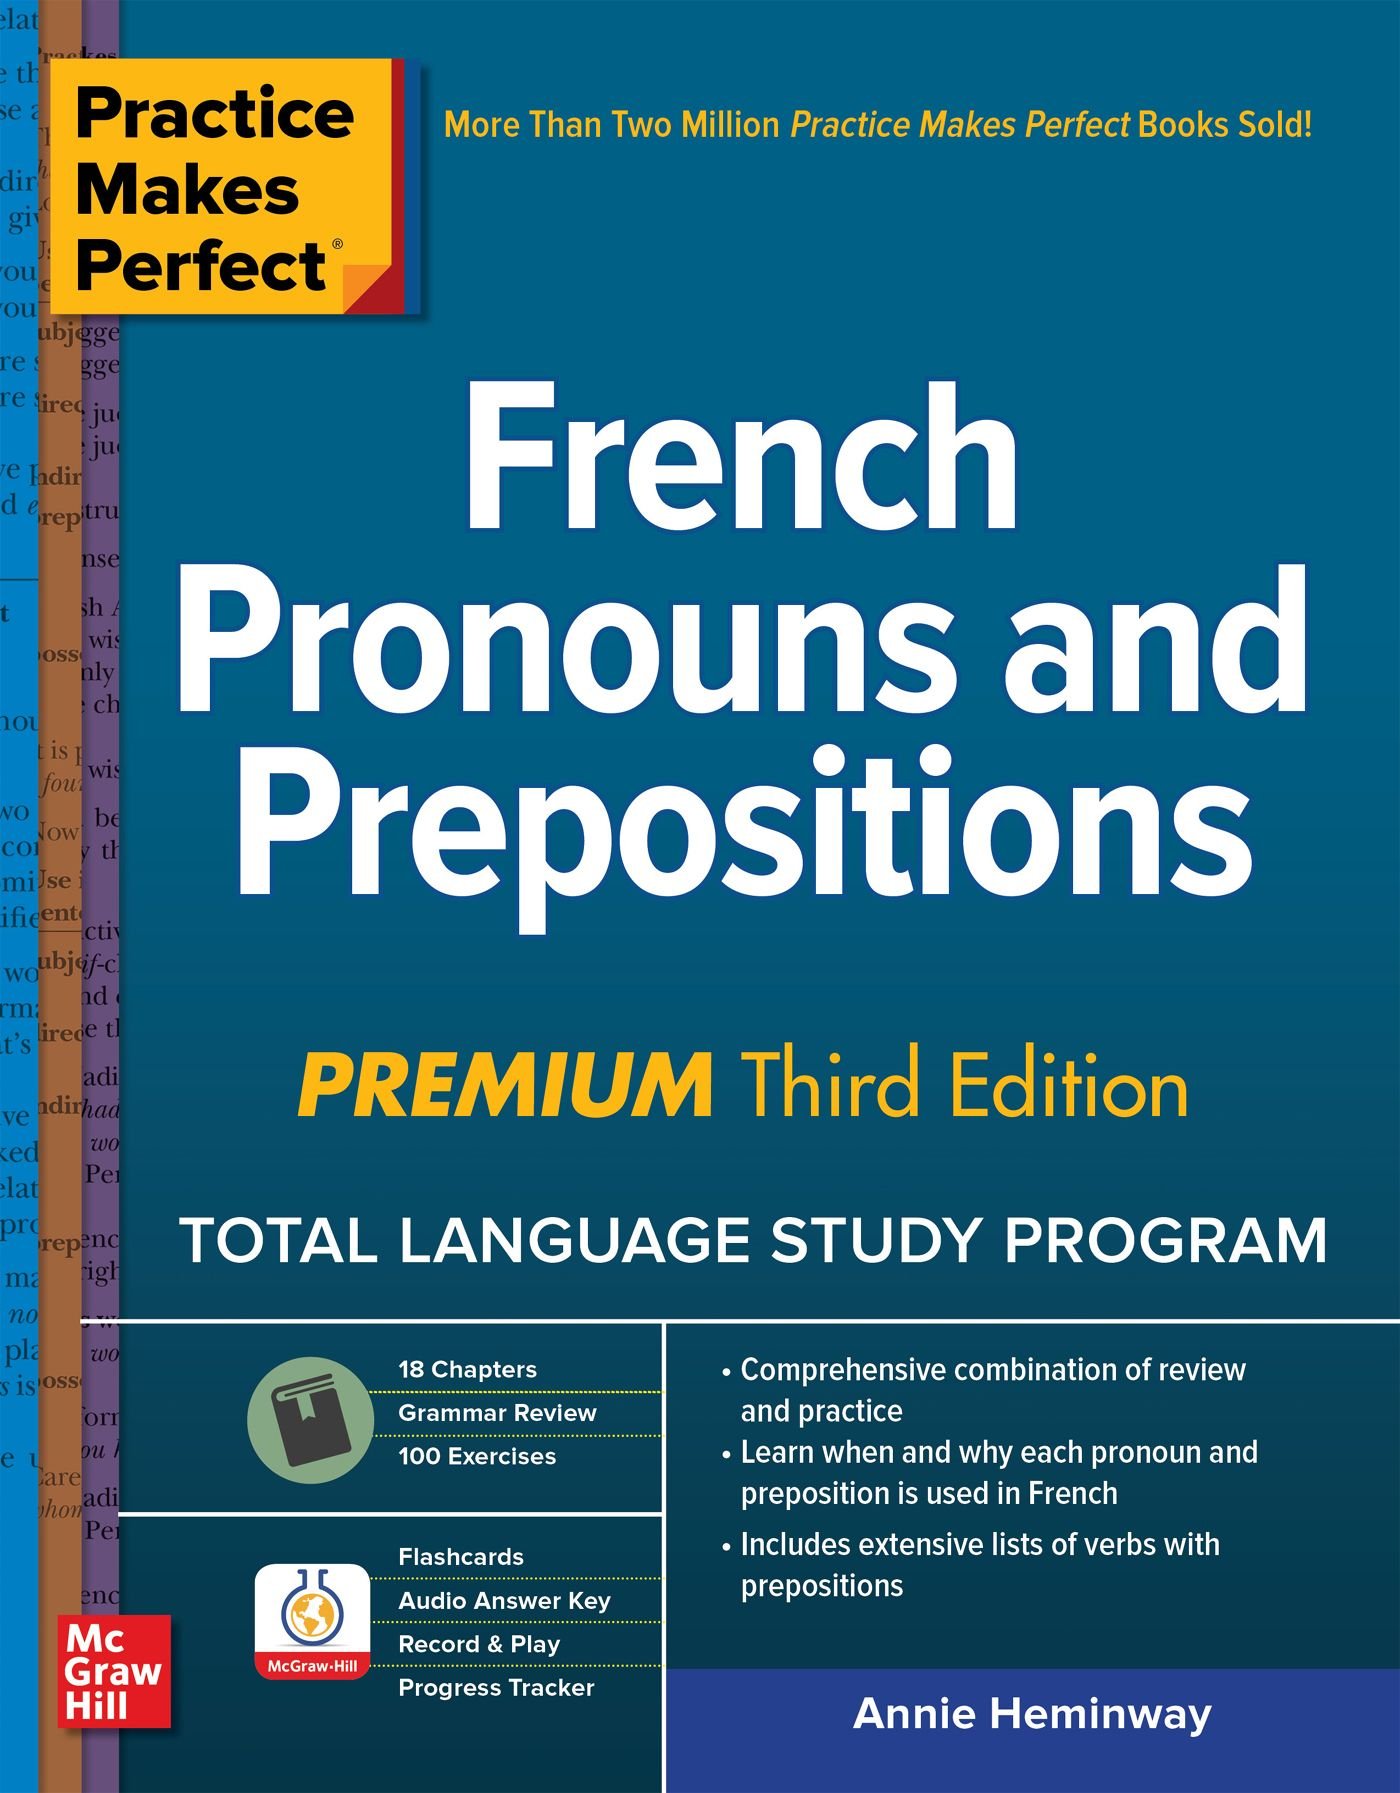 practice-makes-perfect-french-pronouns-and-prepositions-3rd-edition-softarchive